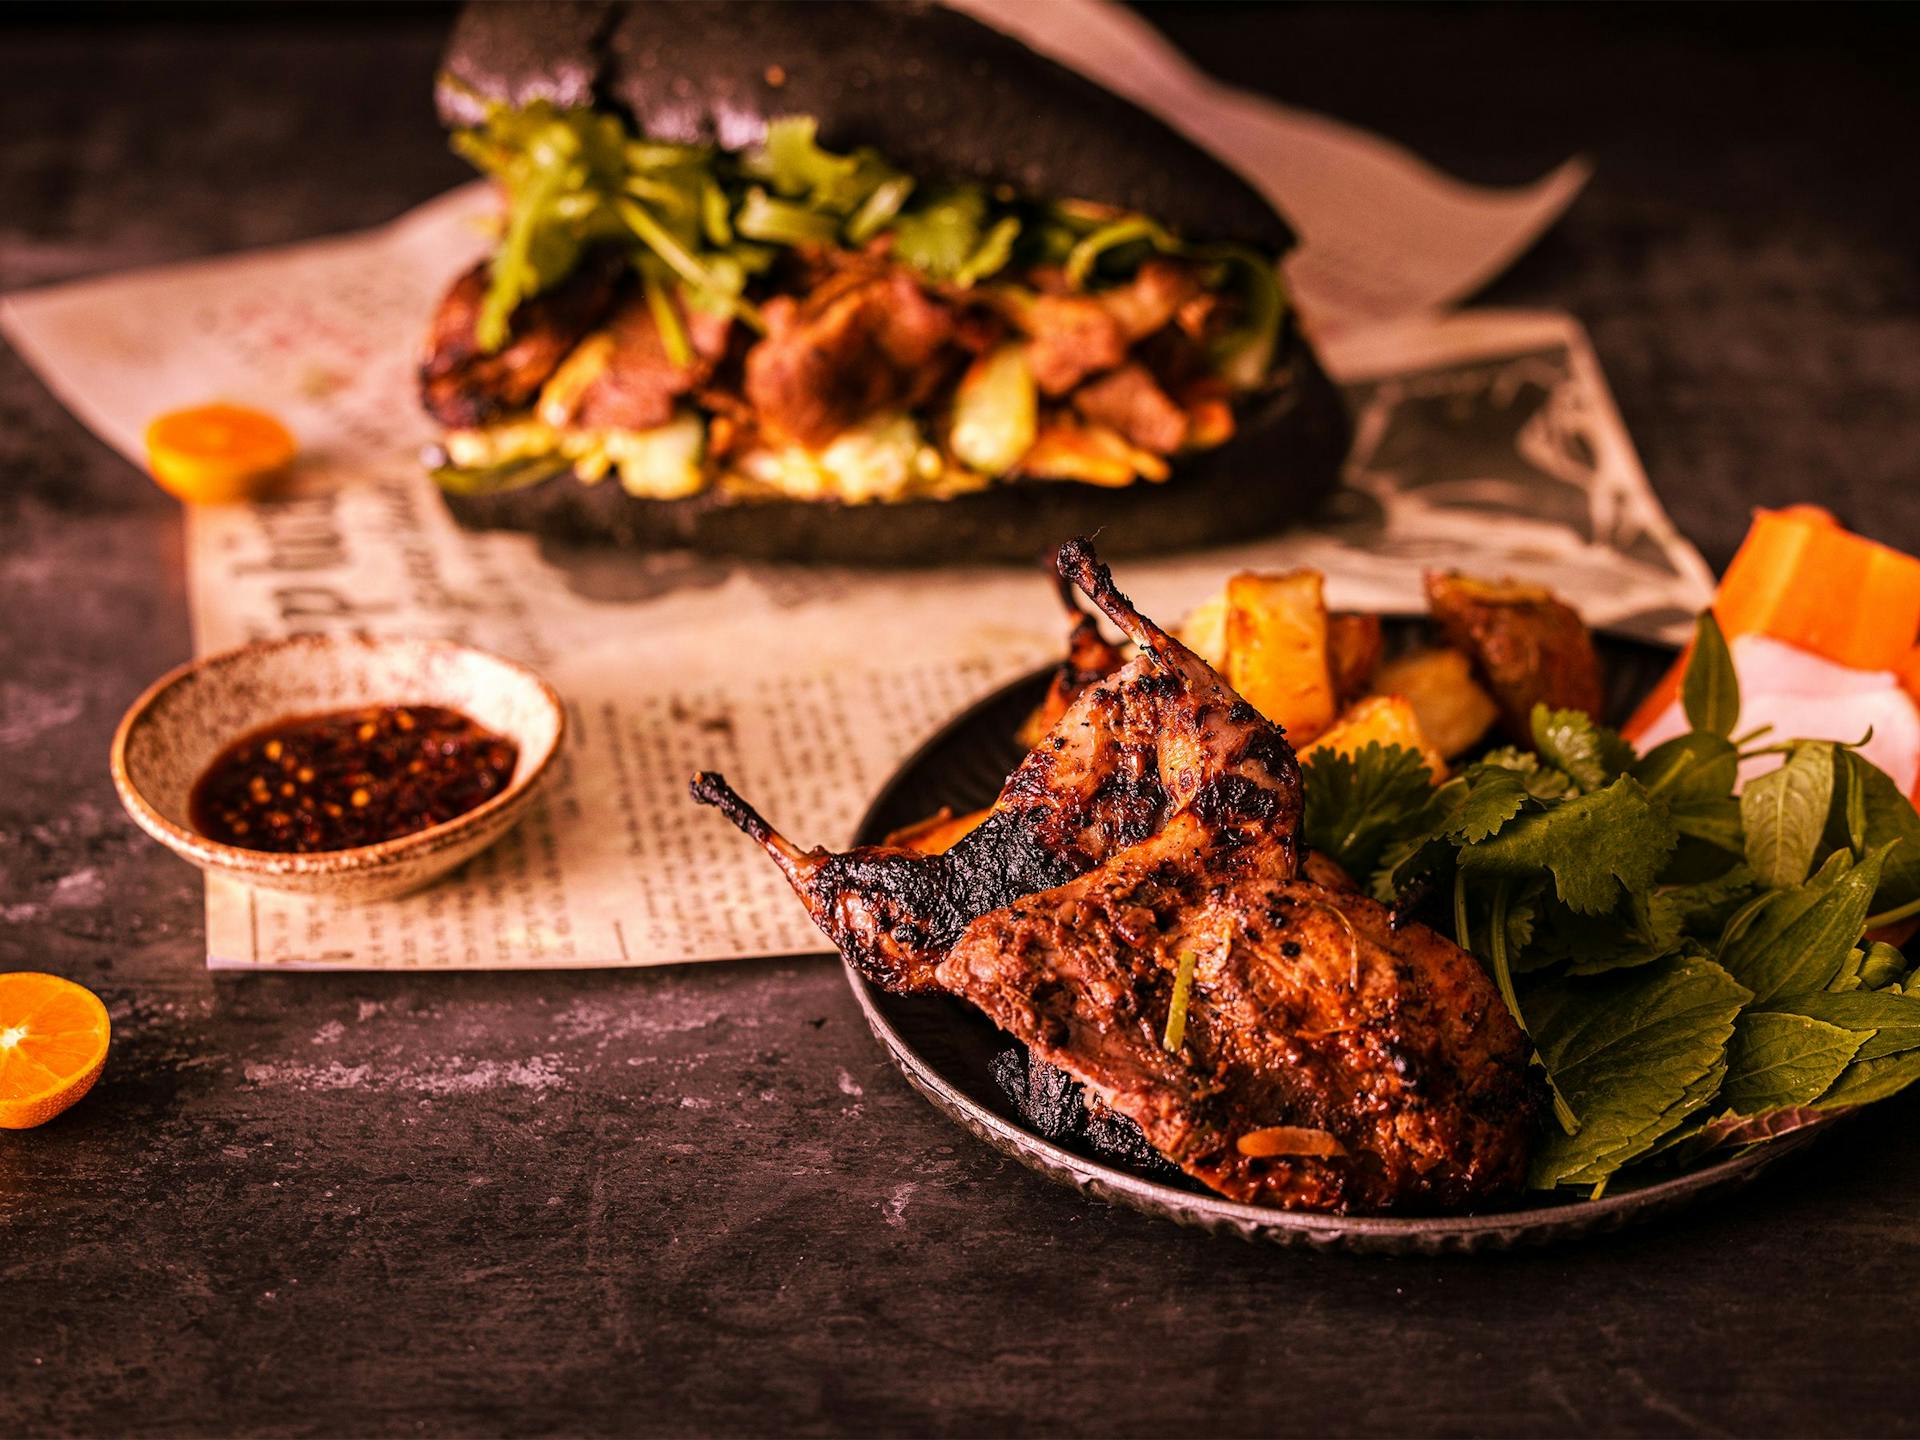 Chargrilled quail and salad on a plate in front of an out of focus banh mi